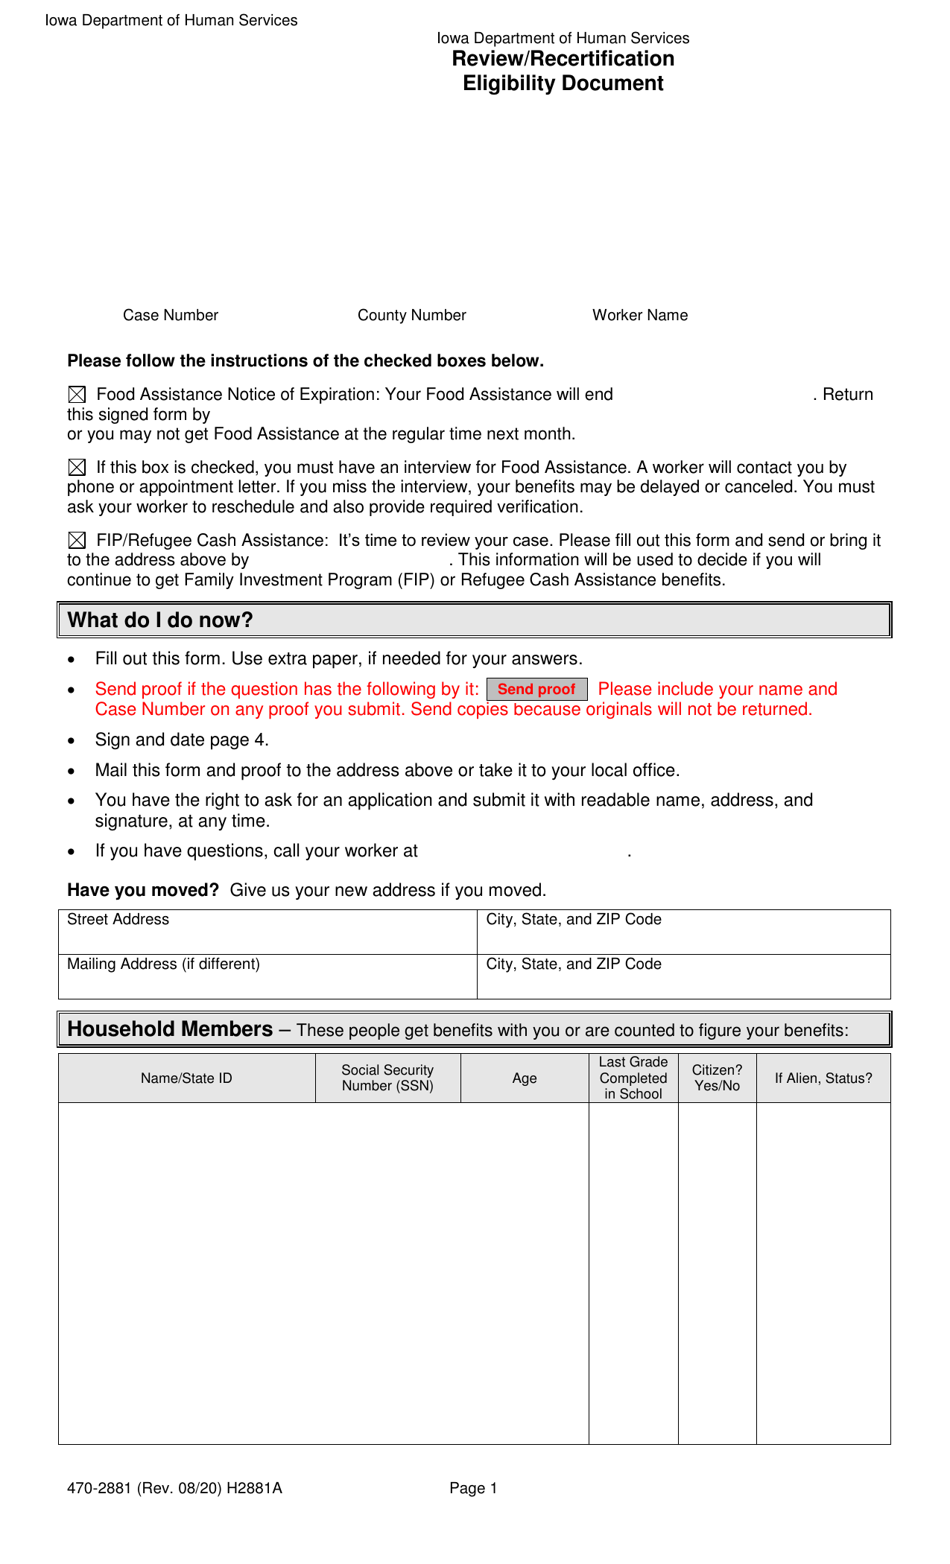 Form 470-2881 Review / Recertification Eligibility Document - Iowa, Page 1